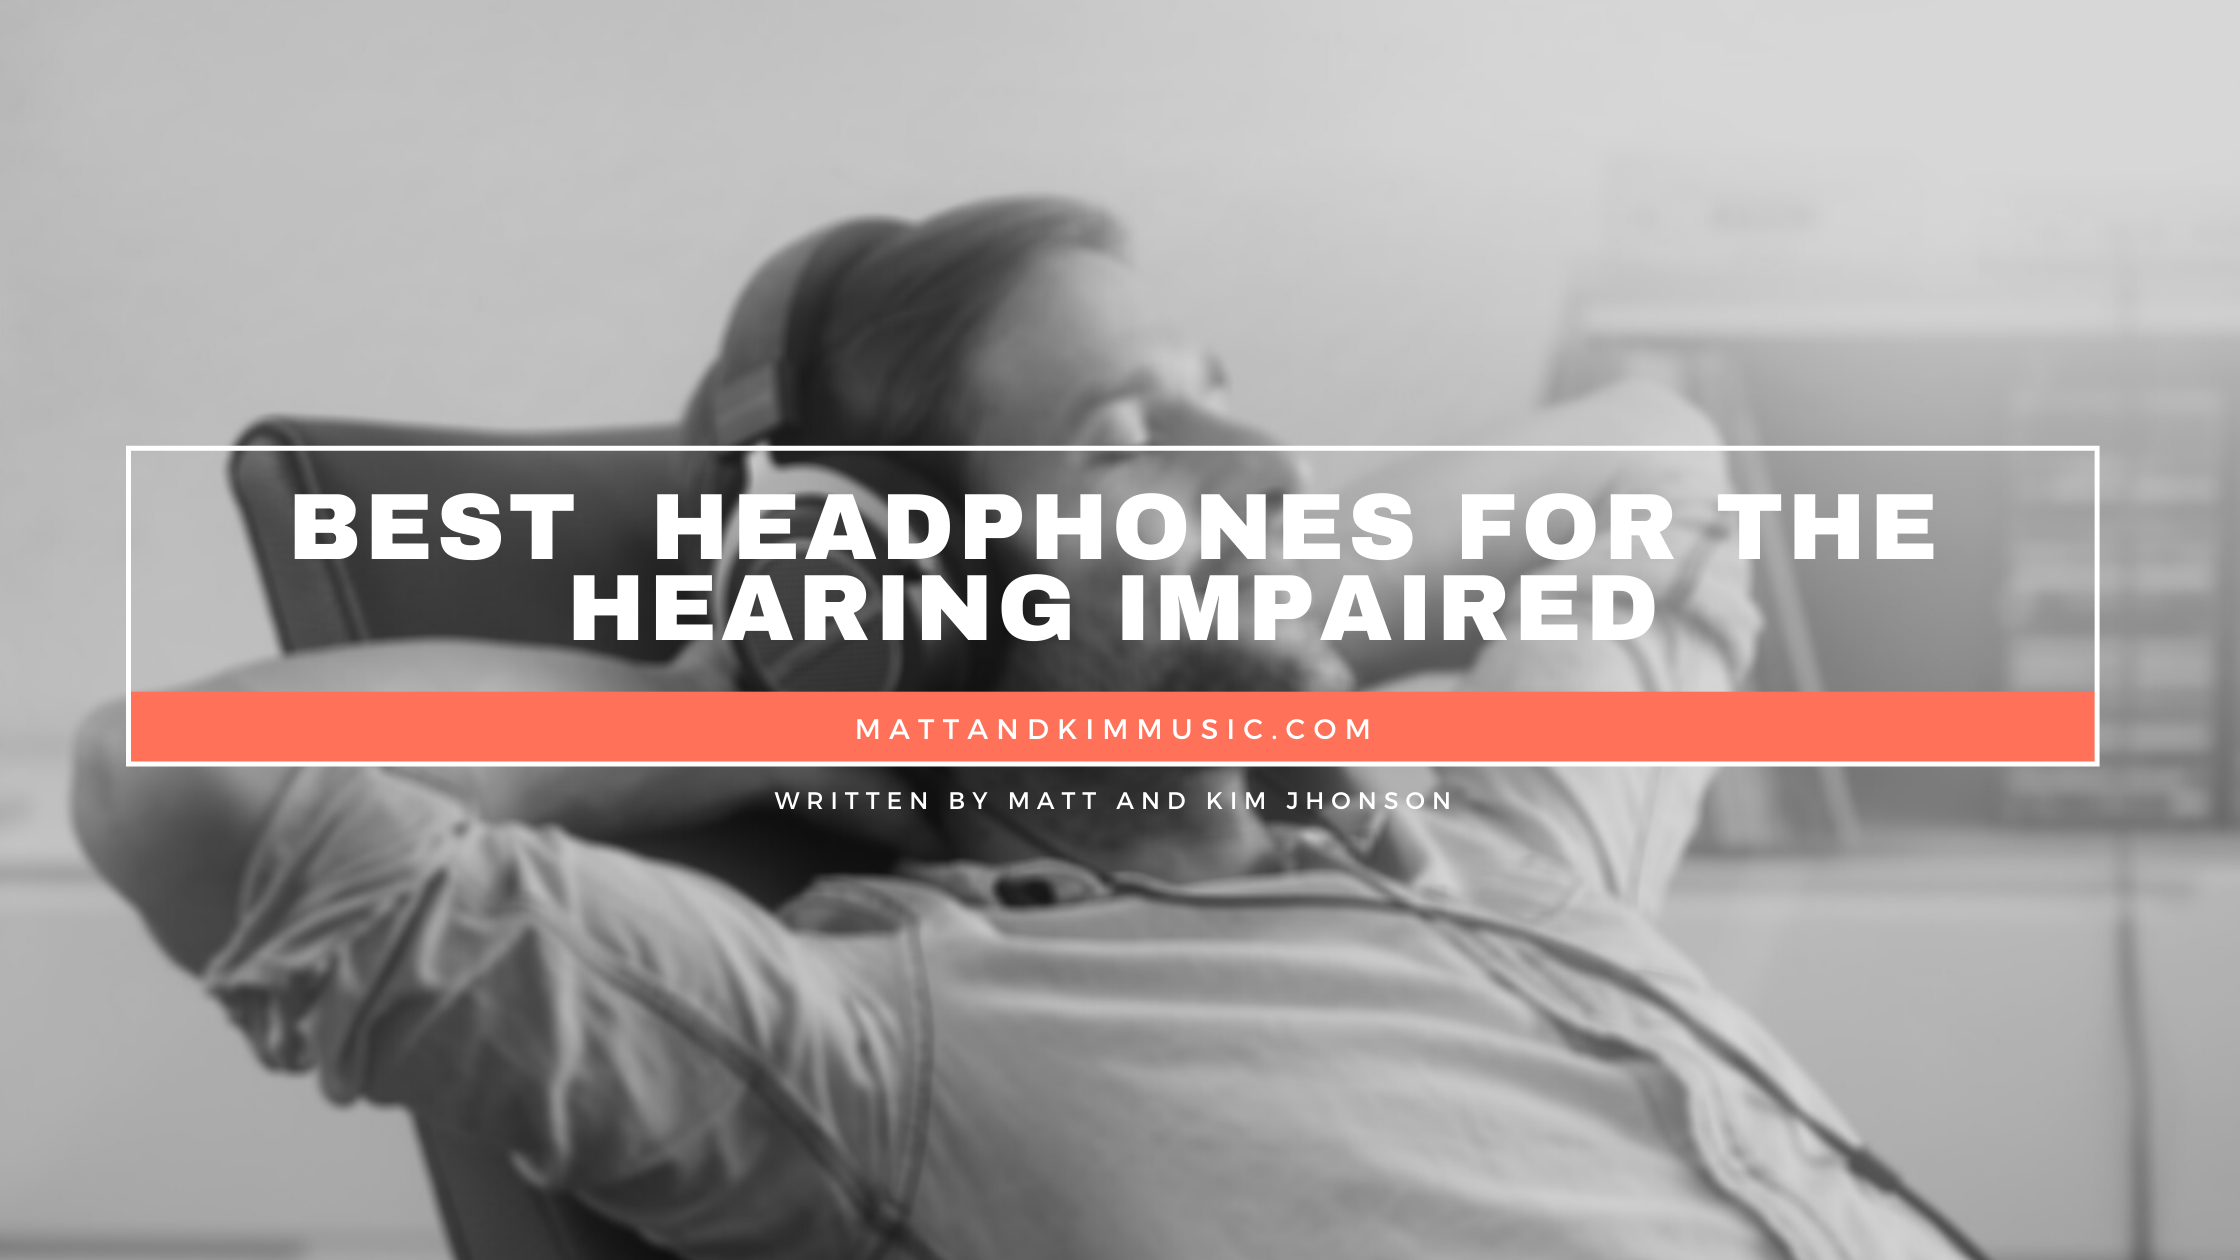 Best Headphones for the Hearing Impaired